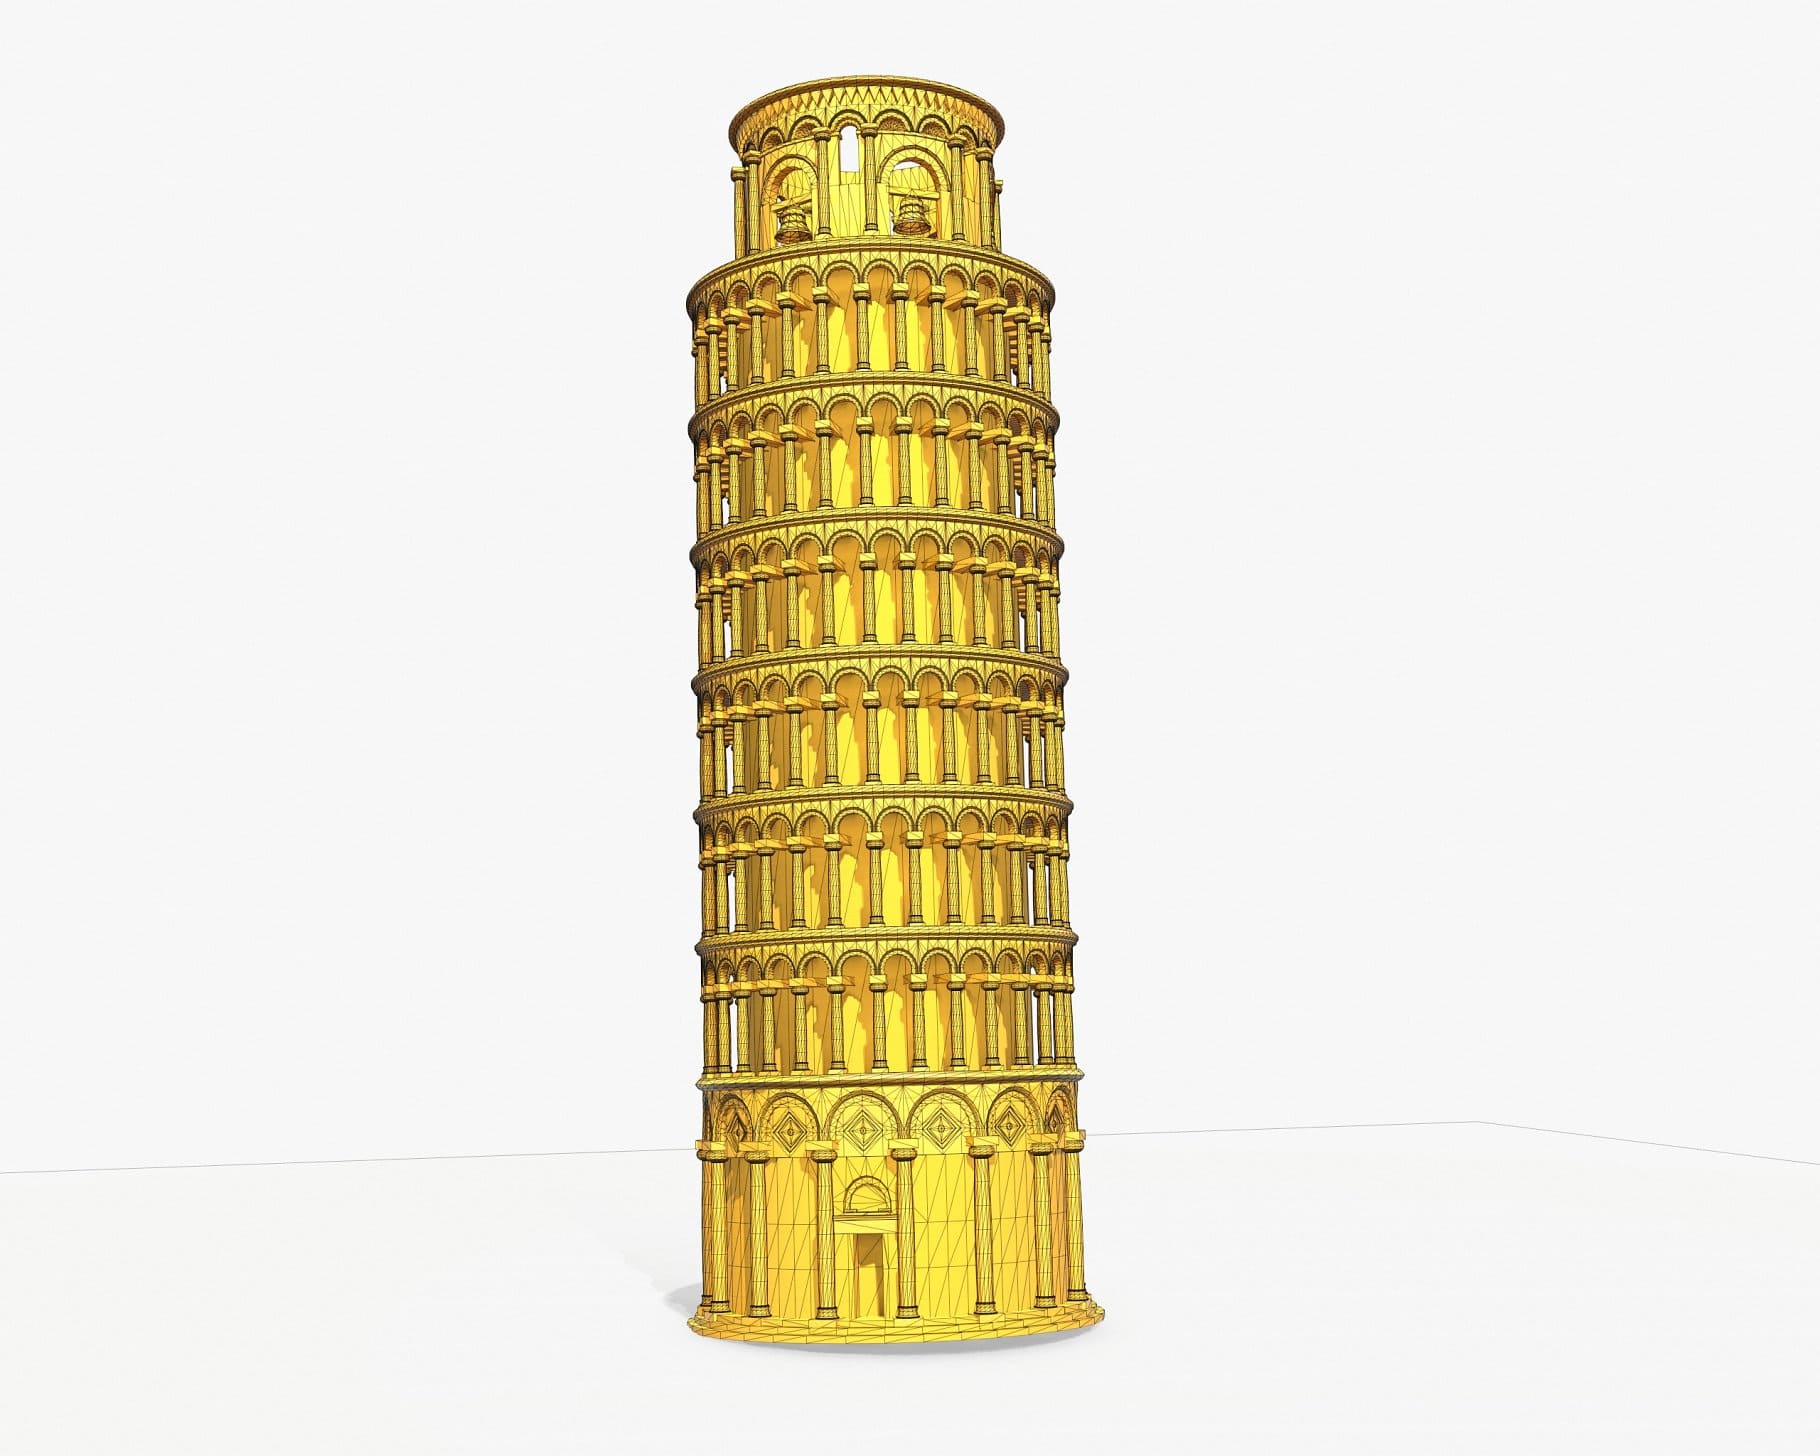 3D model of the marble Leaning Tower of Pisa.